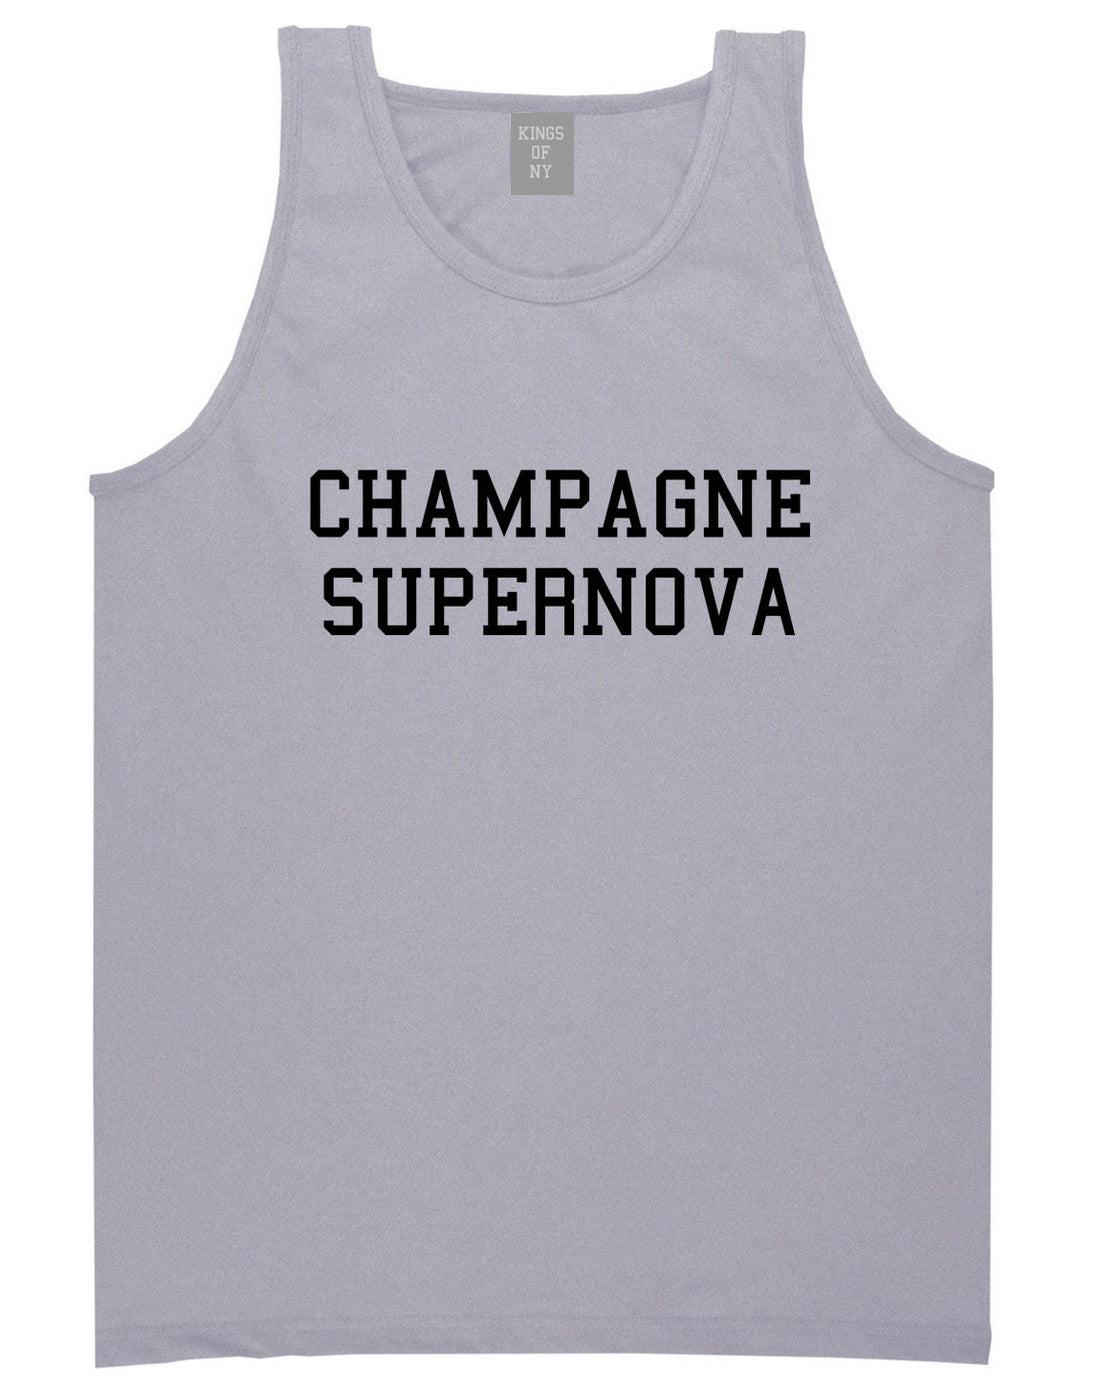 Champagne Supernova Tank Top in Grey by Kings Of NY